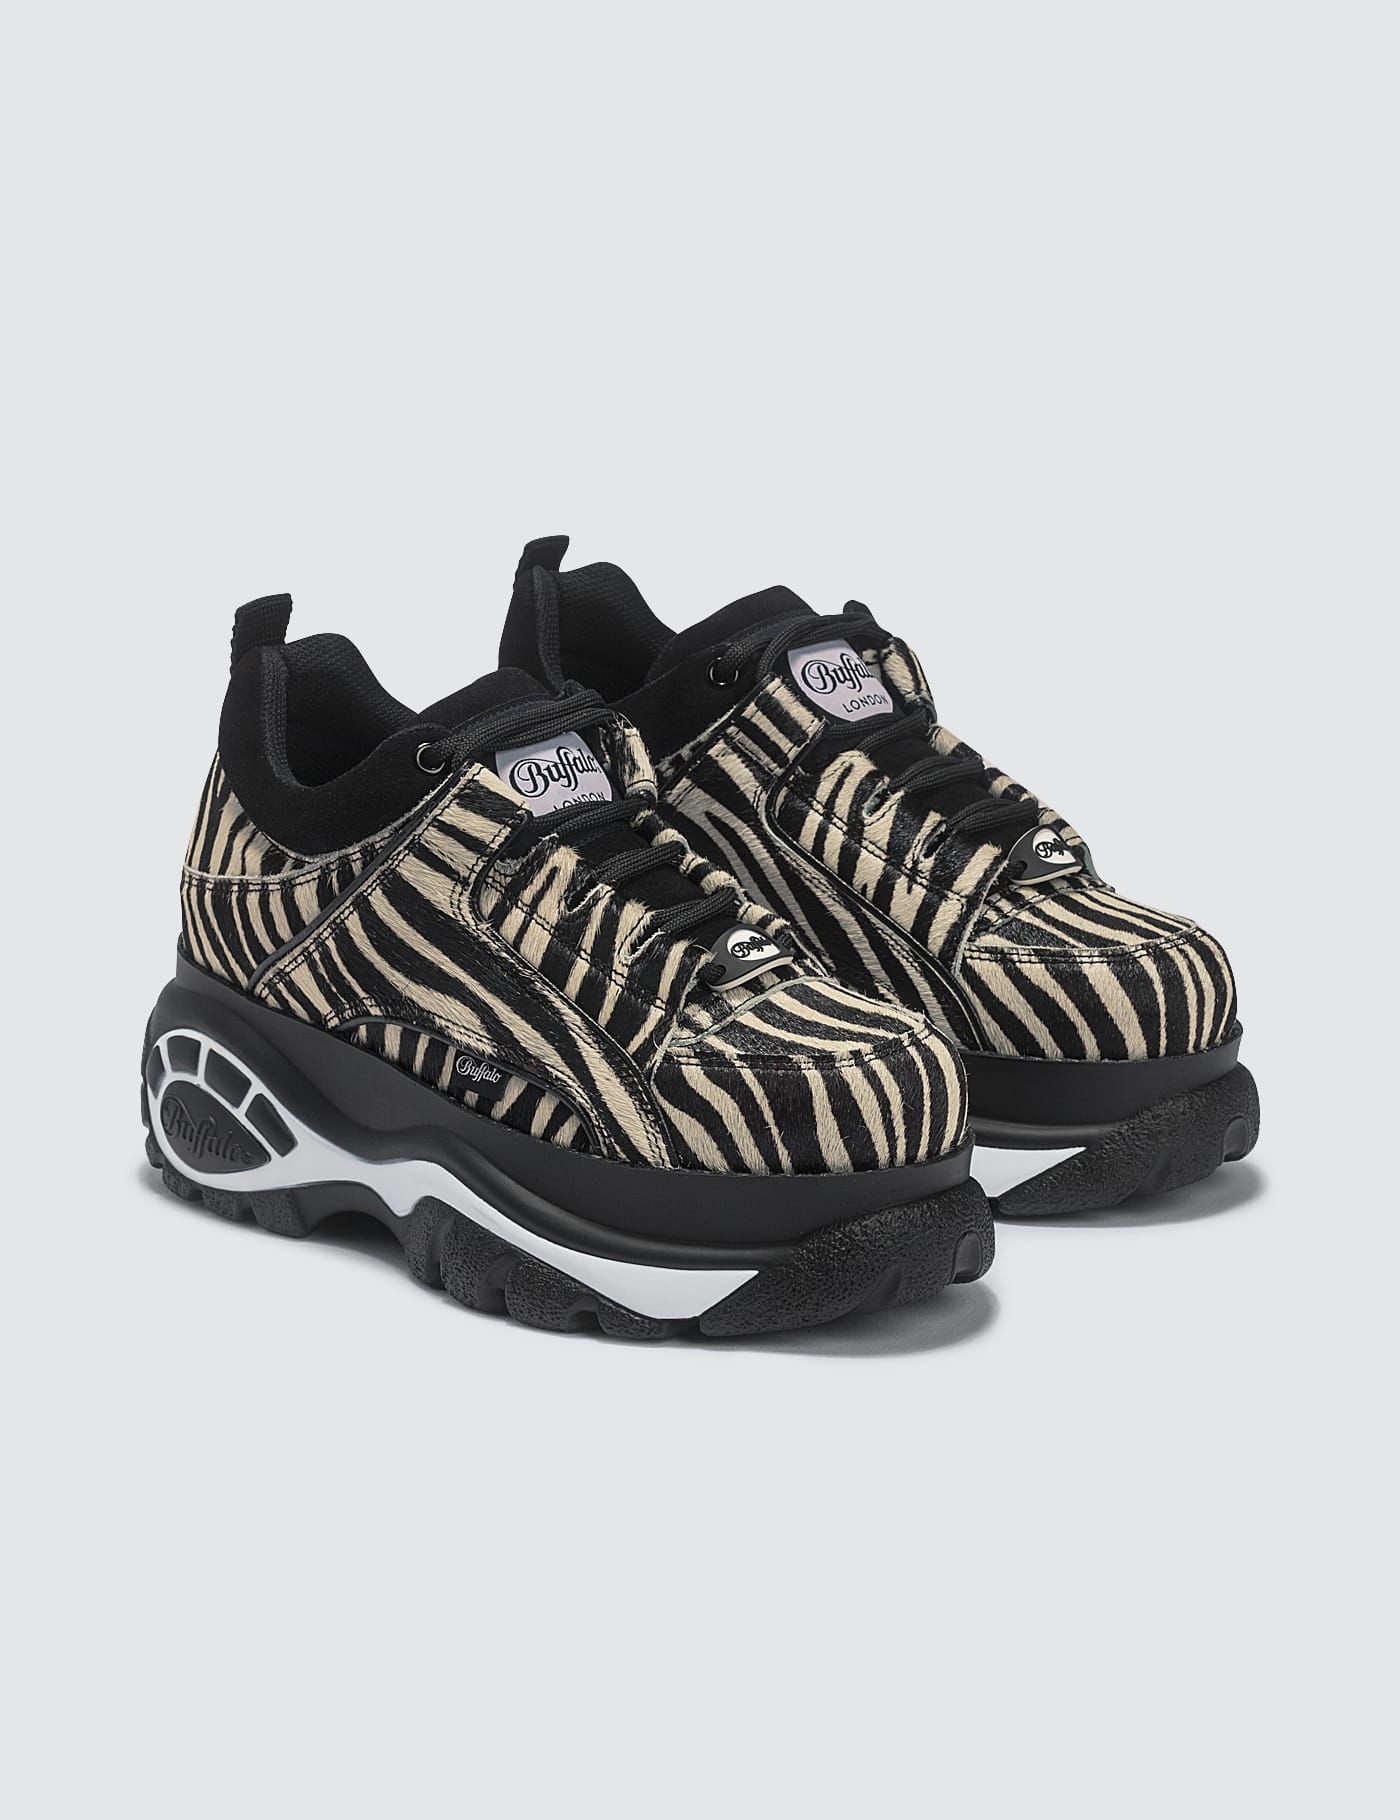 Buffalo London - Zebra Fur Low Top Platform Sneakers | HBX - Globally  Curated Fashion and Lifestyle by Hypebeast